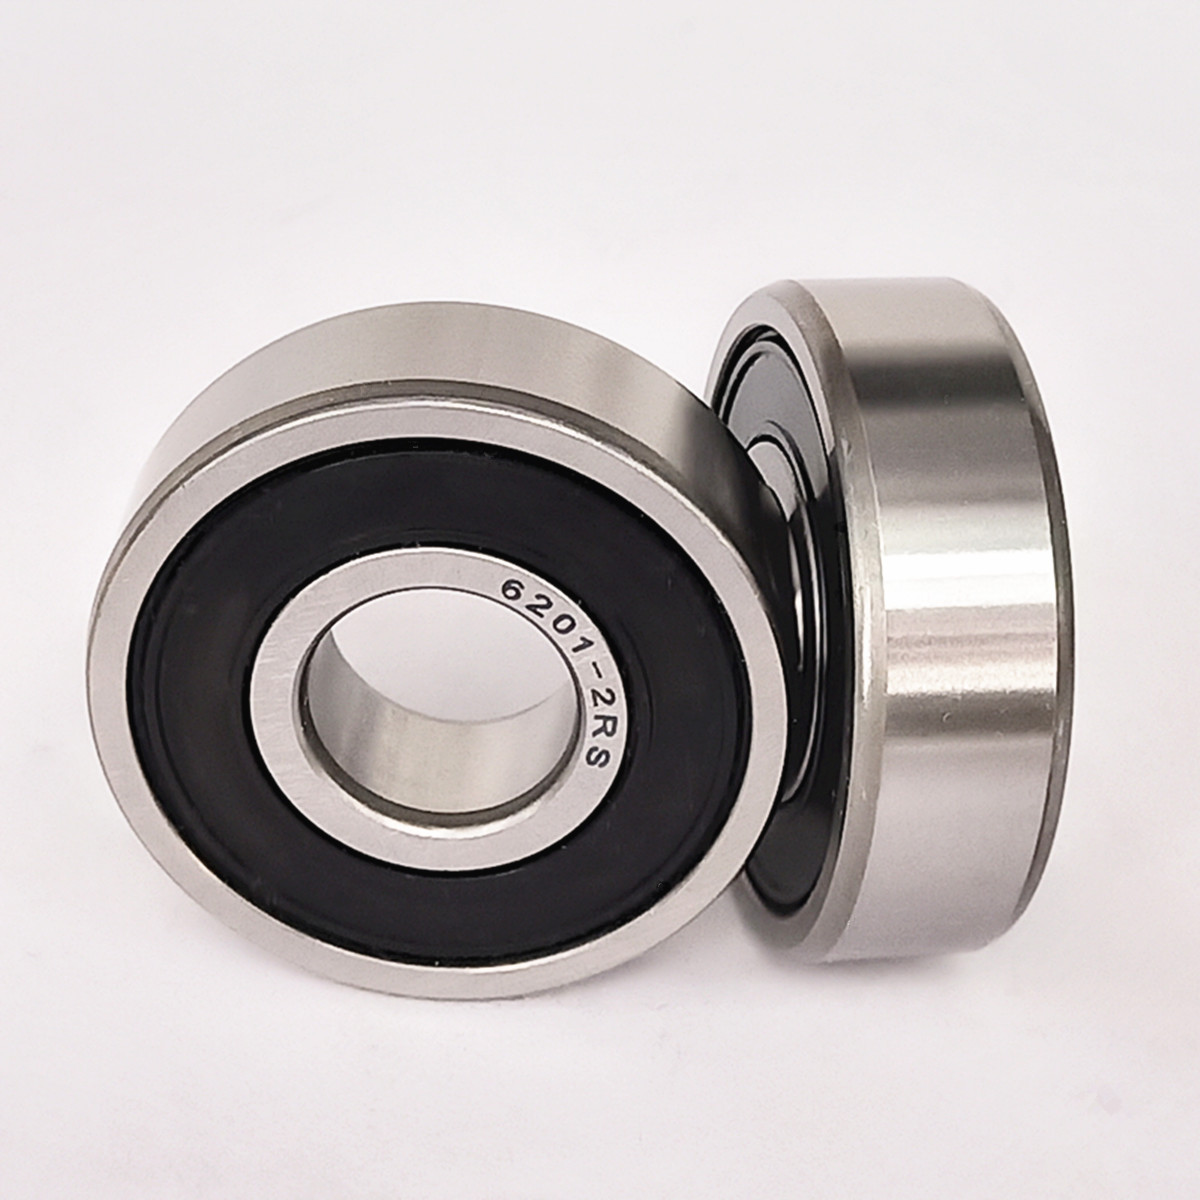 Cheap NSK Technology Machine Gearbox Ball Bearing Deep Groove bearings 6201 ZZ 2RS  12 32 10mm for sale